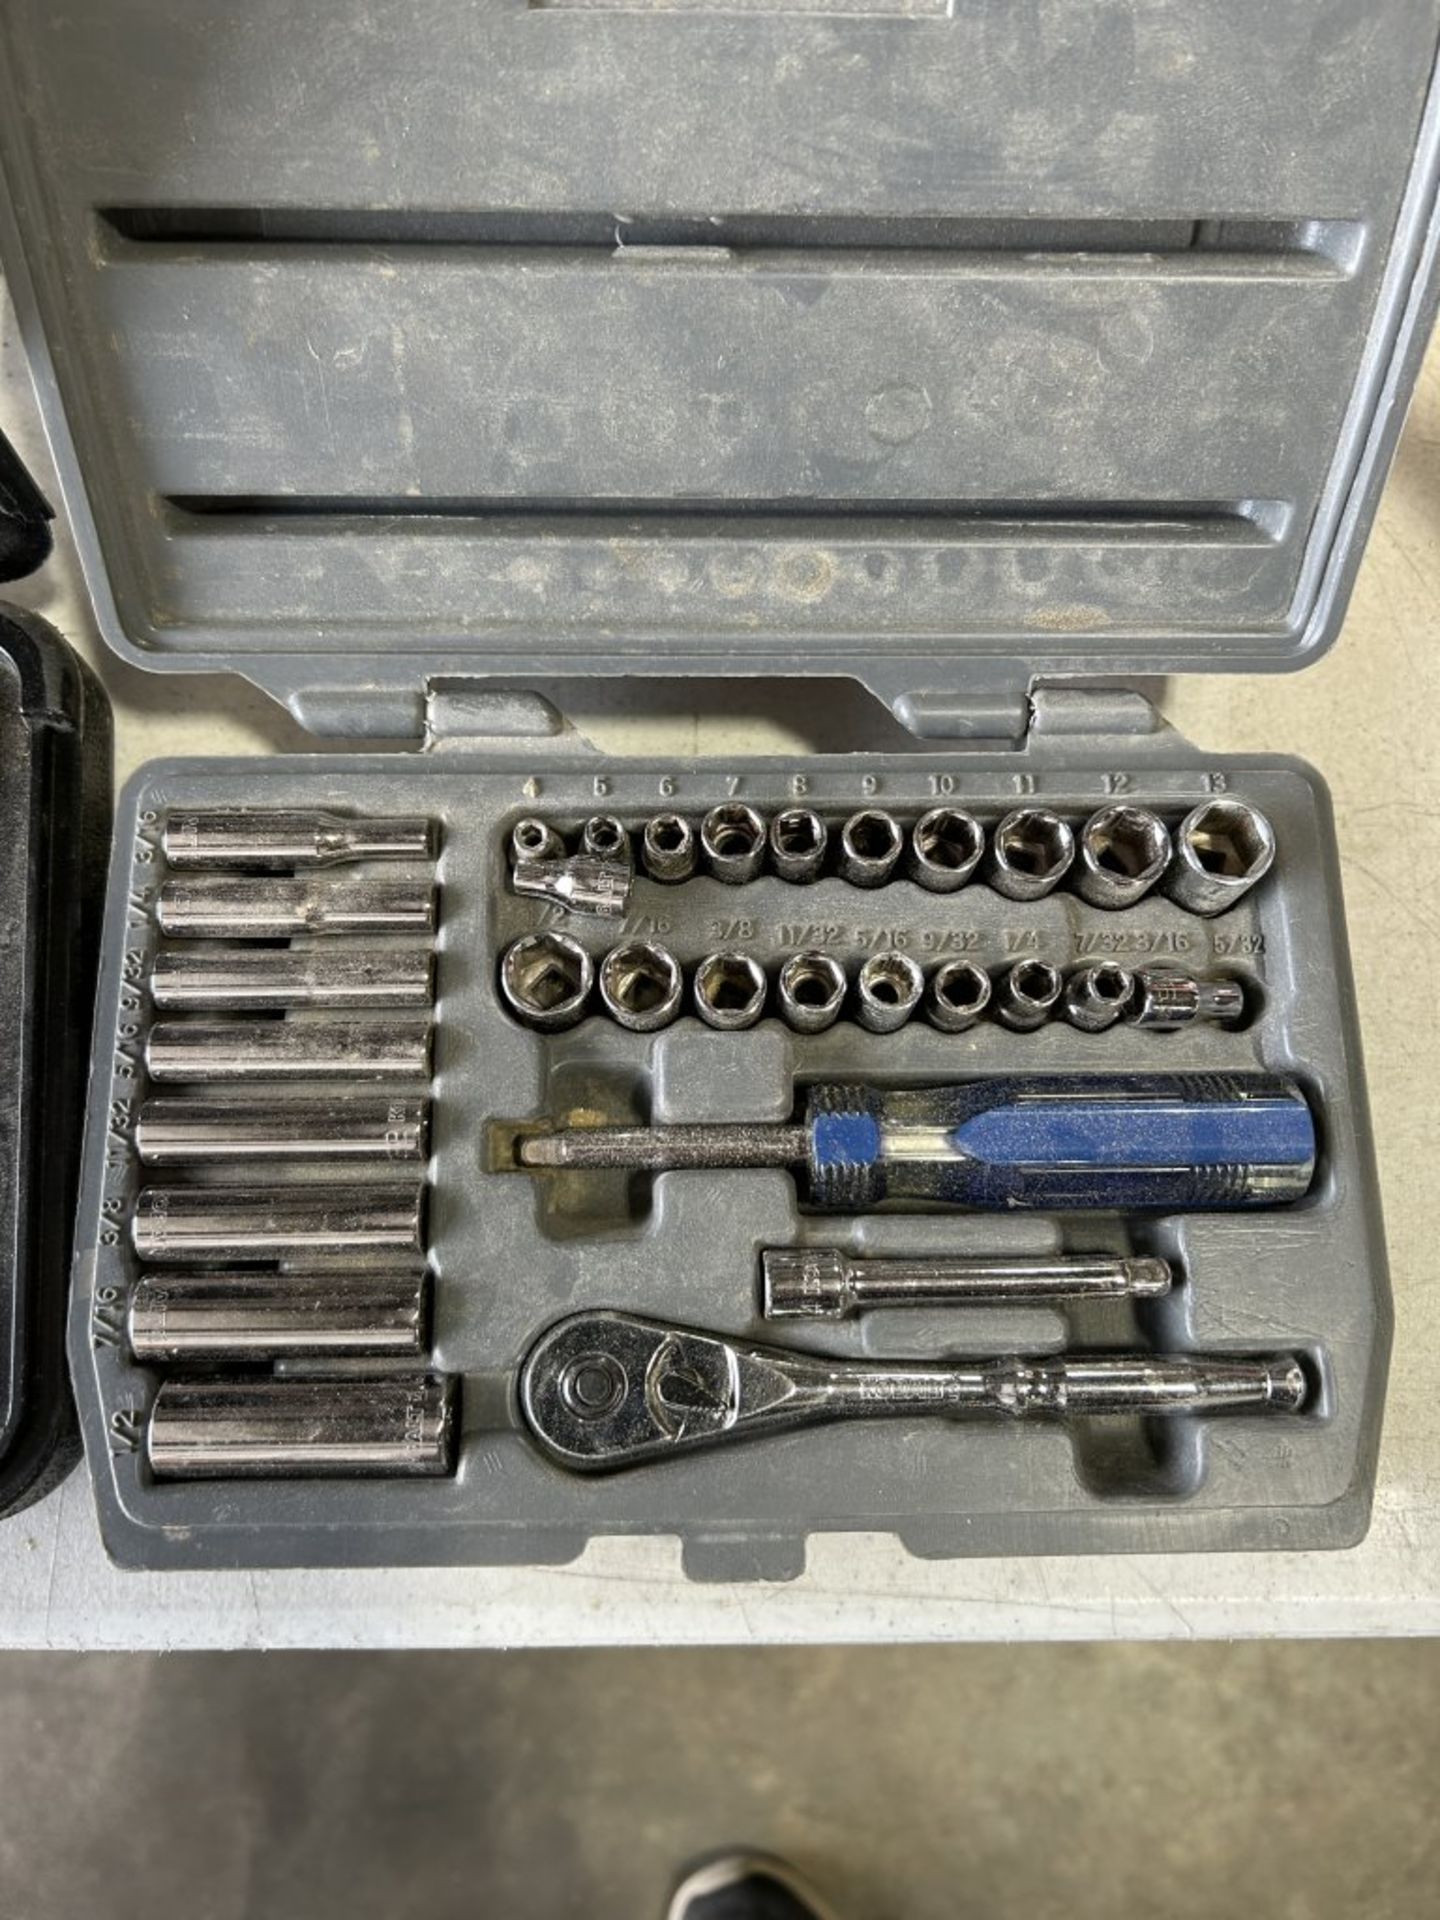 ASSORTED SOCKET SETS, WRENCHES, SUPER SOCKETS, ETC. - Image 2 of 7